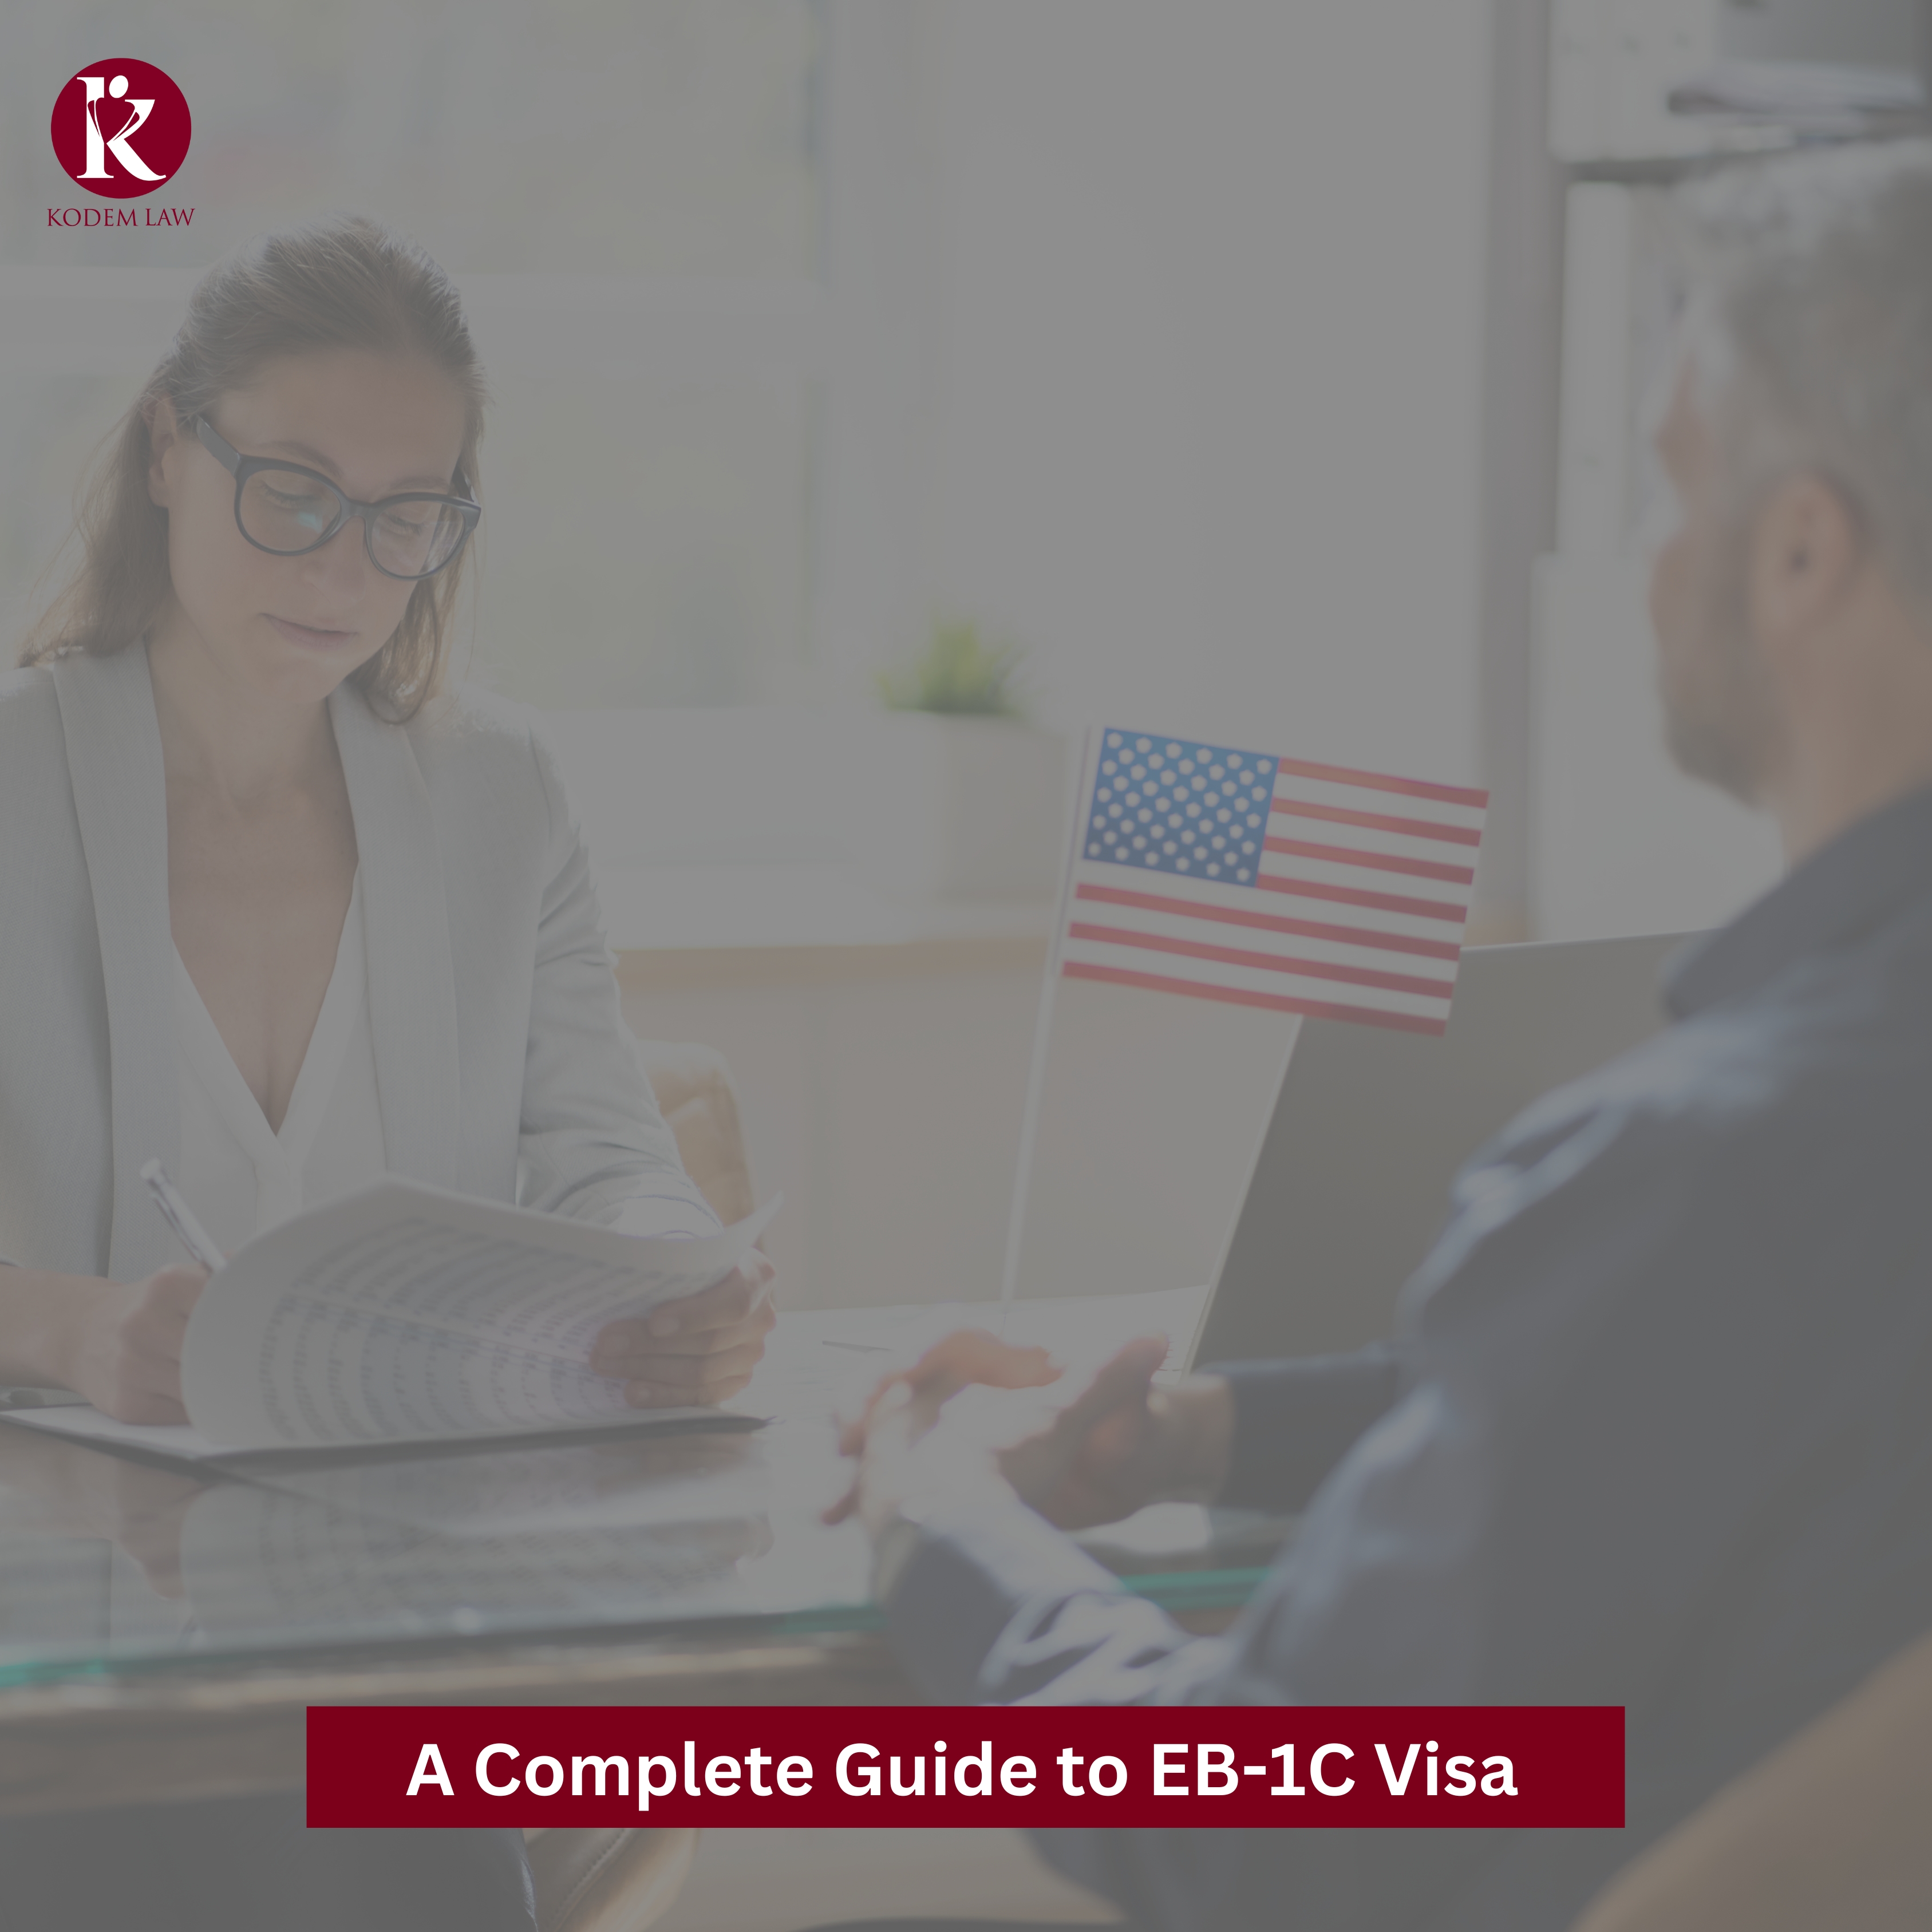  A Complete Guide to EB-1C Visa 